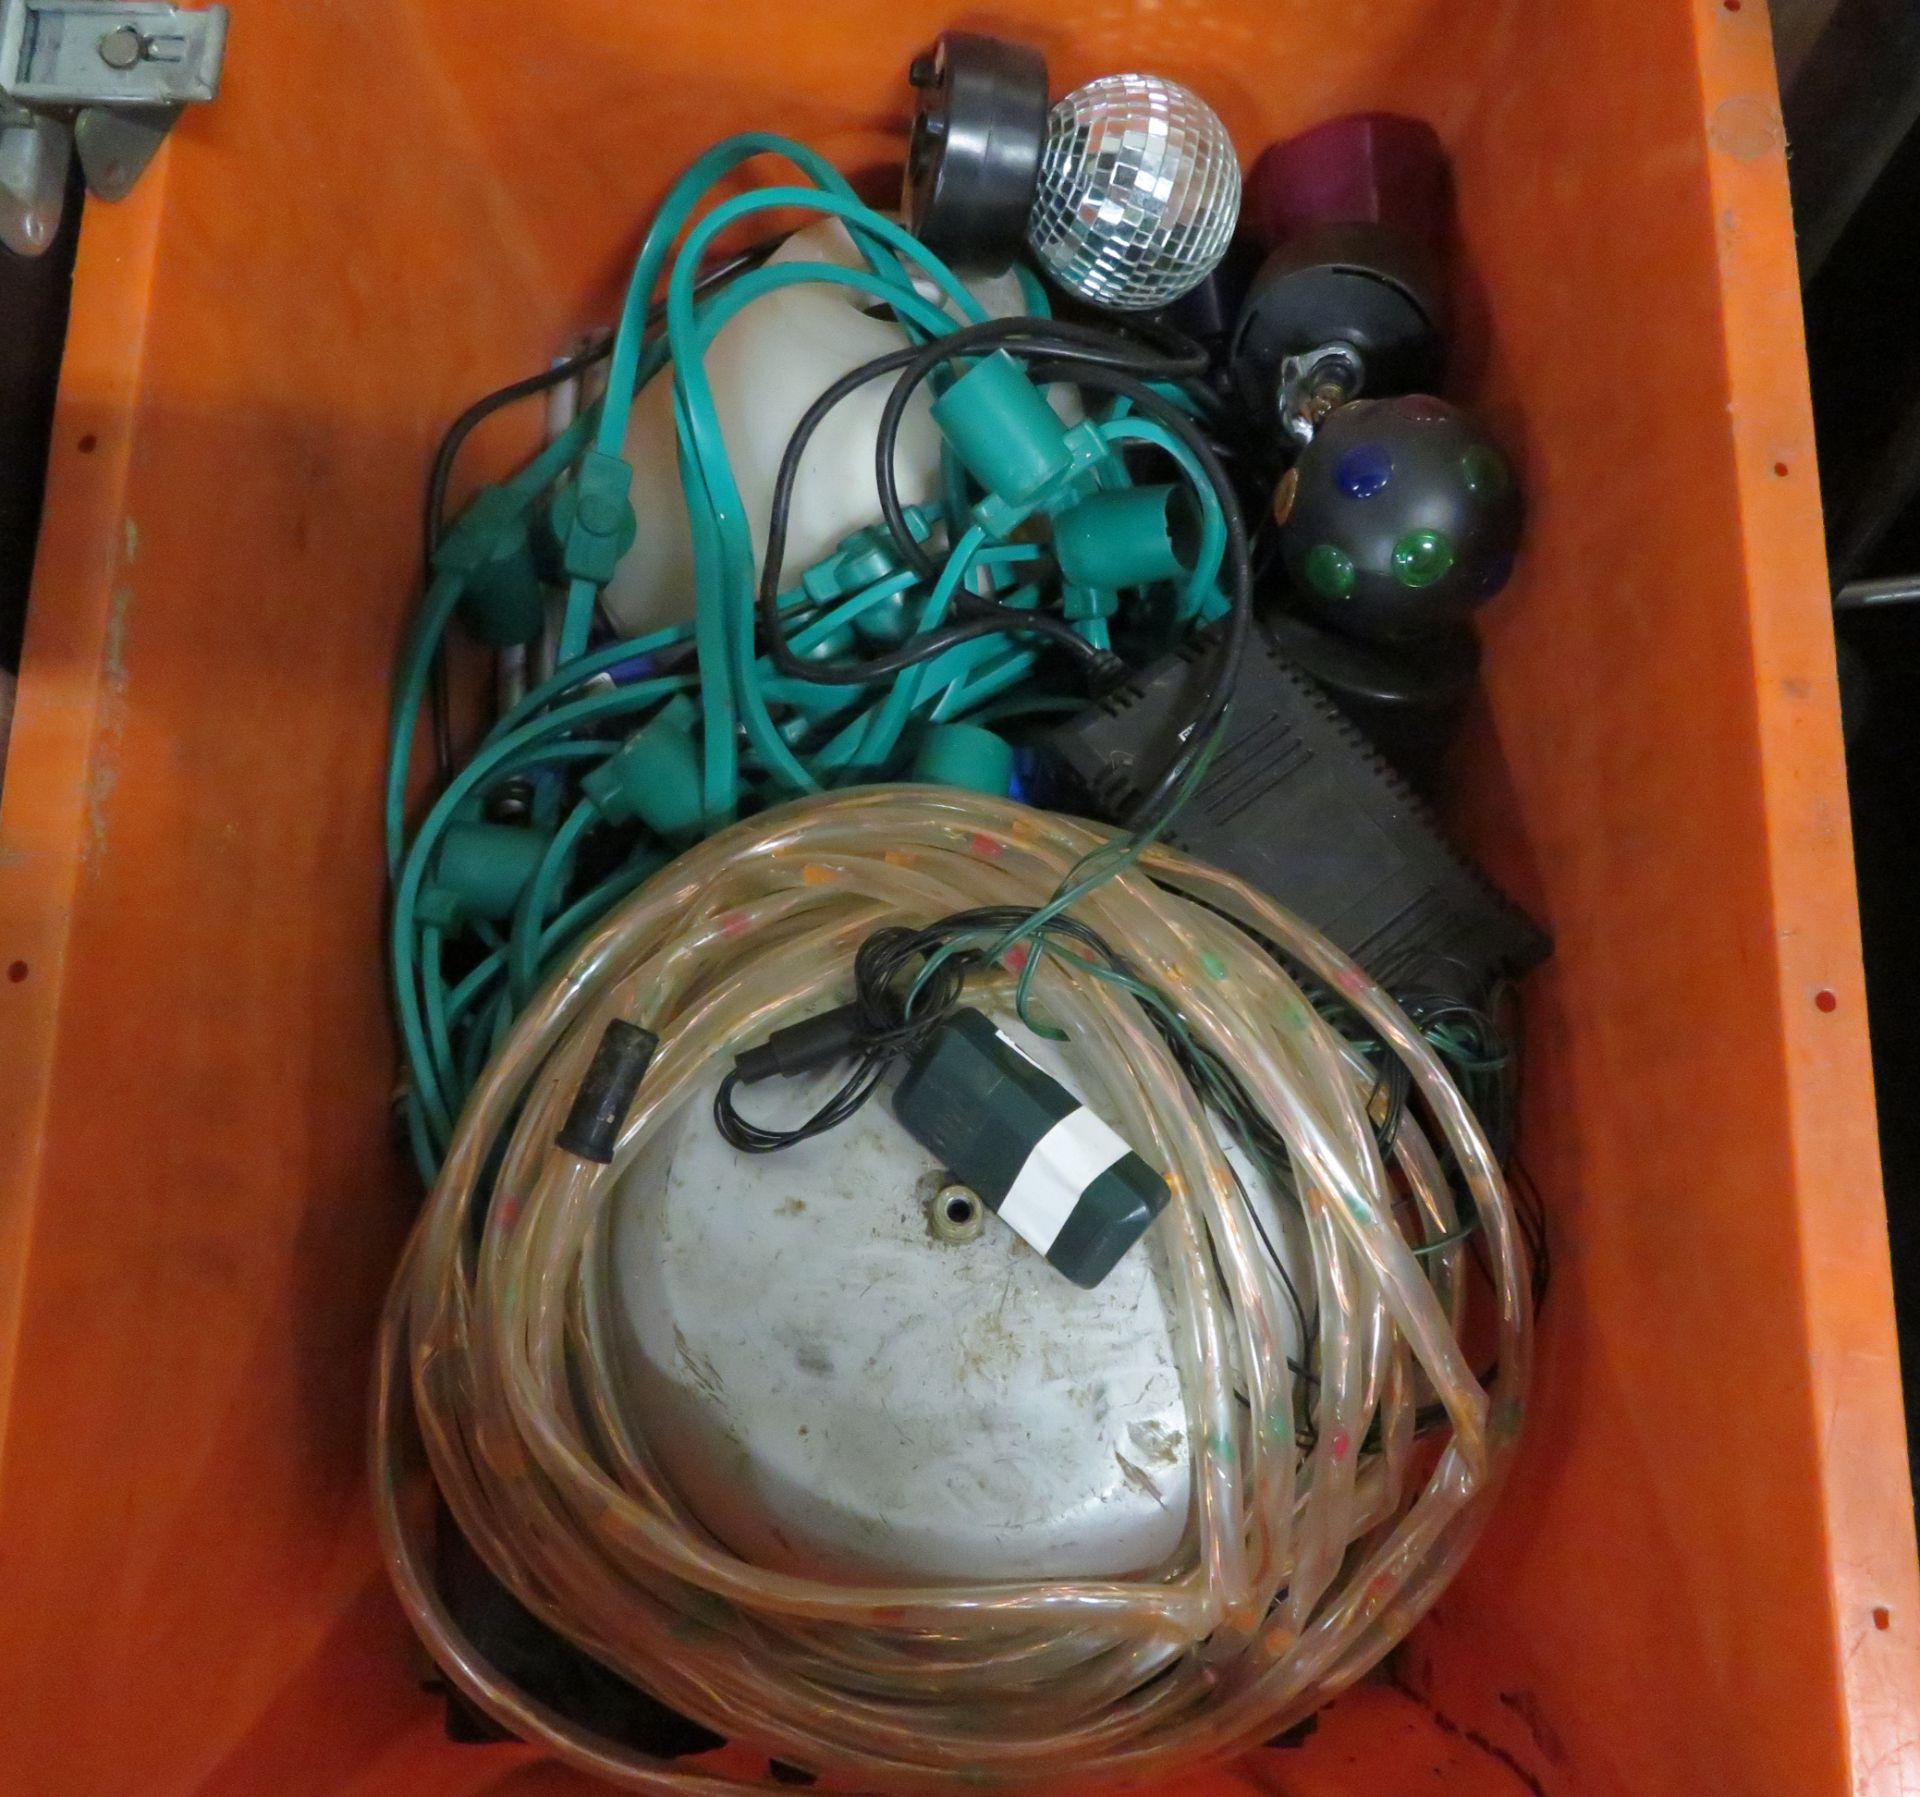 Orange Crate Containing Emergency Light Fittings and Exit Signs. - Image 4 of 4